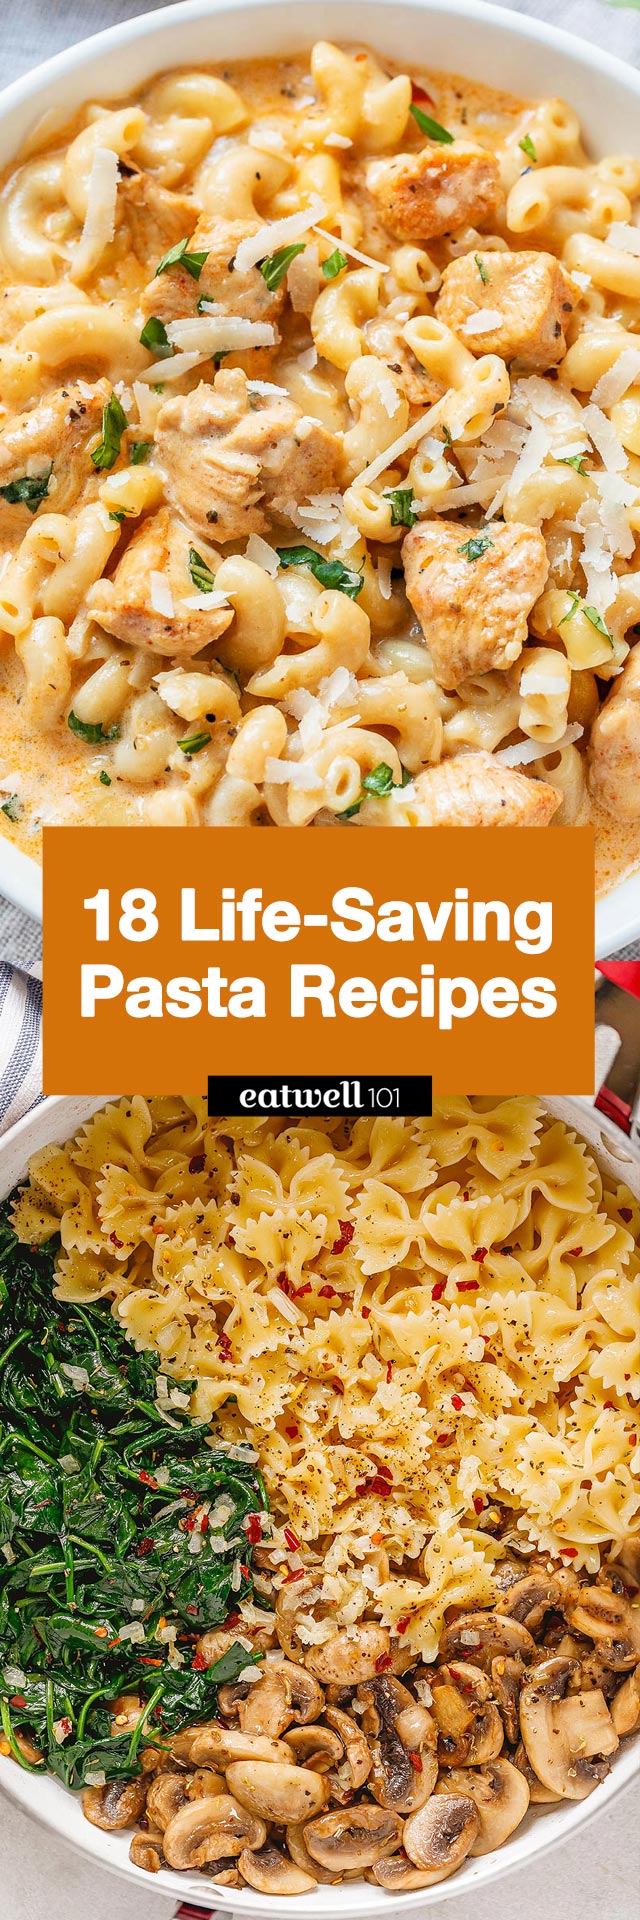 Easy Pasta Recipes - #pasta #dinner #recipes #eatwell101 - These easy pasta dinner recipes will make planning your weeknight dinners so simple! 